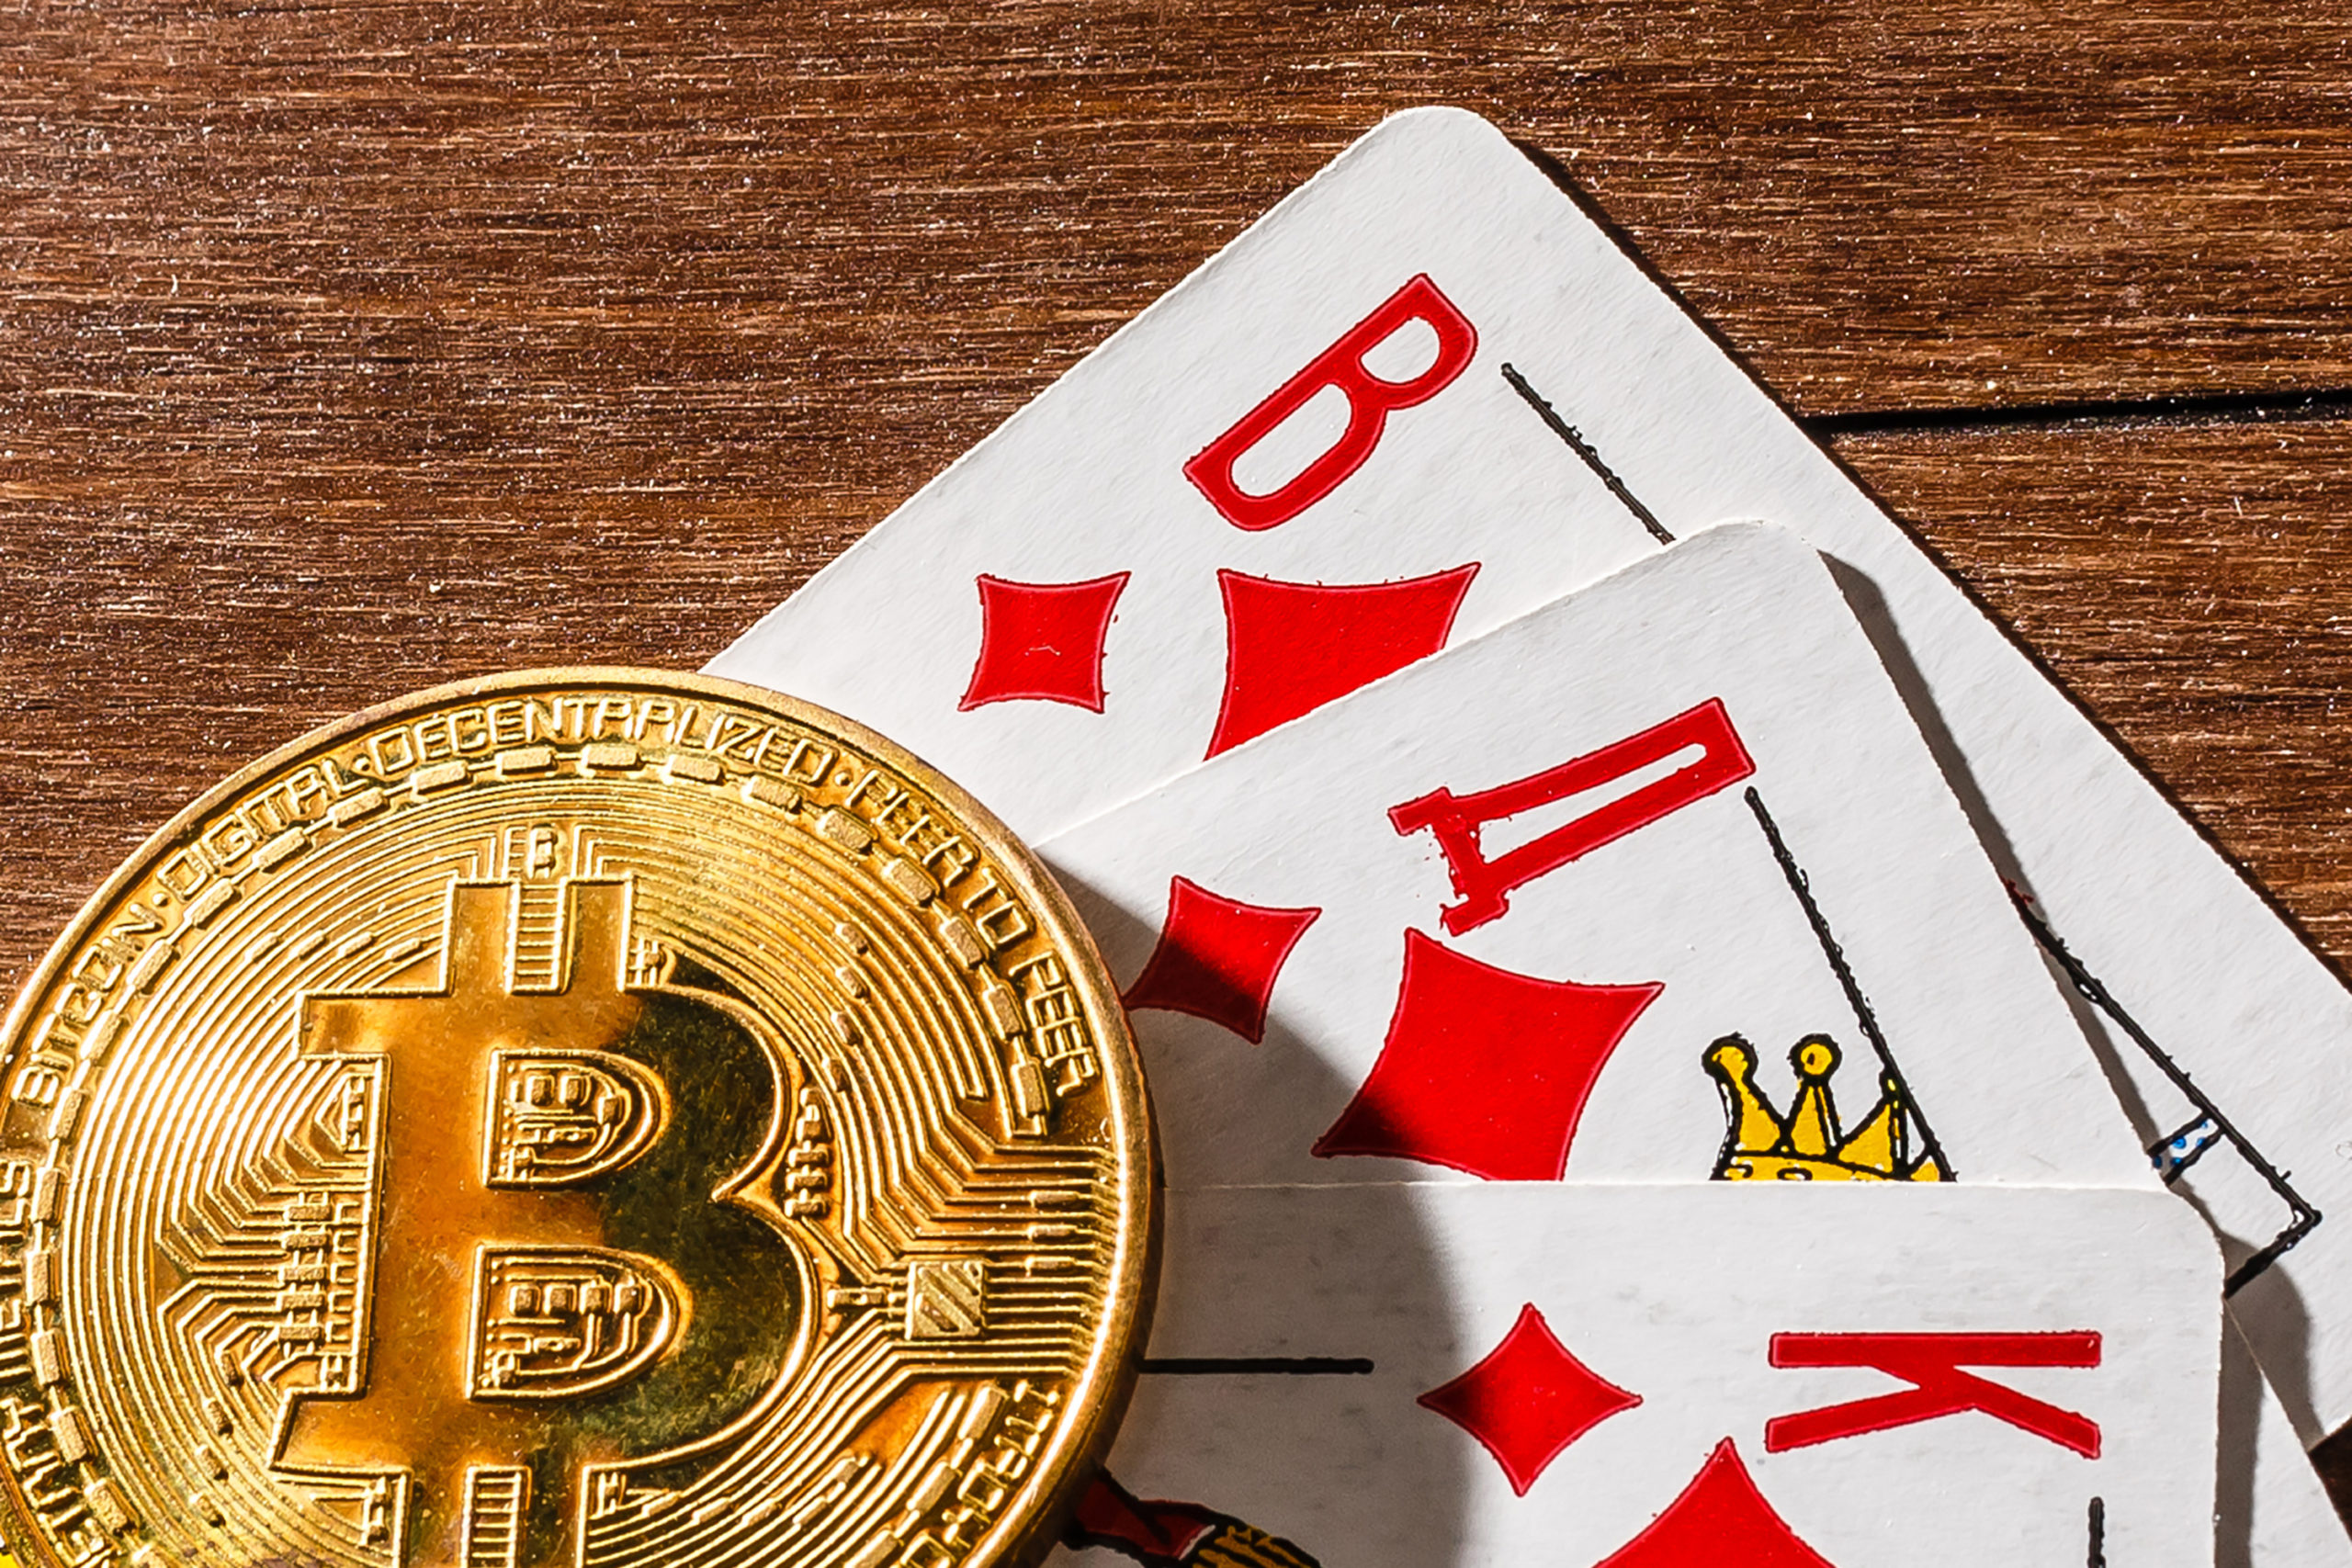 If You Do Not casino bitcoin Now, You Will Hate Yourself Later